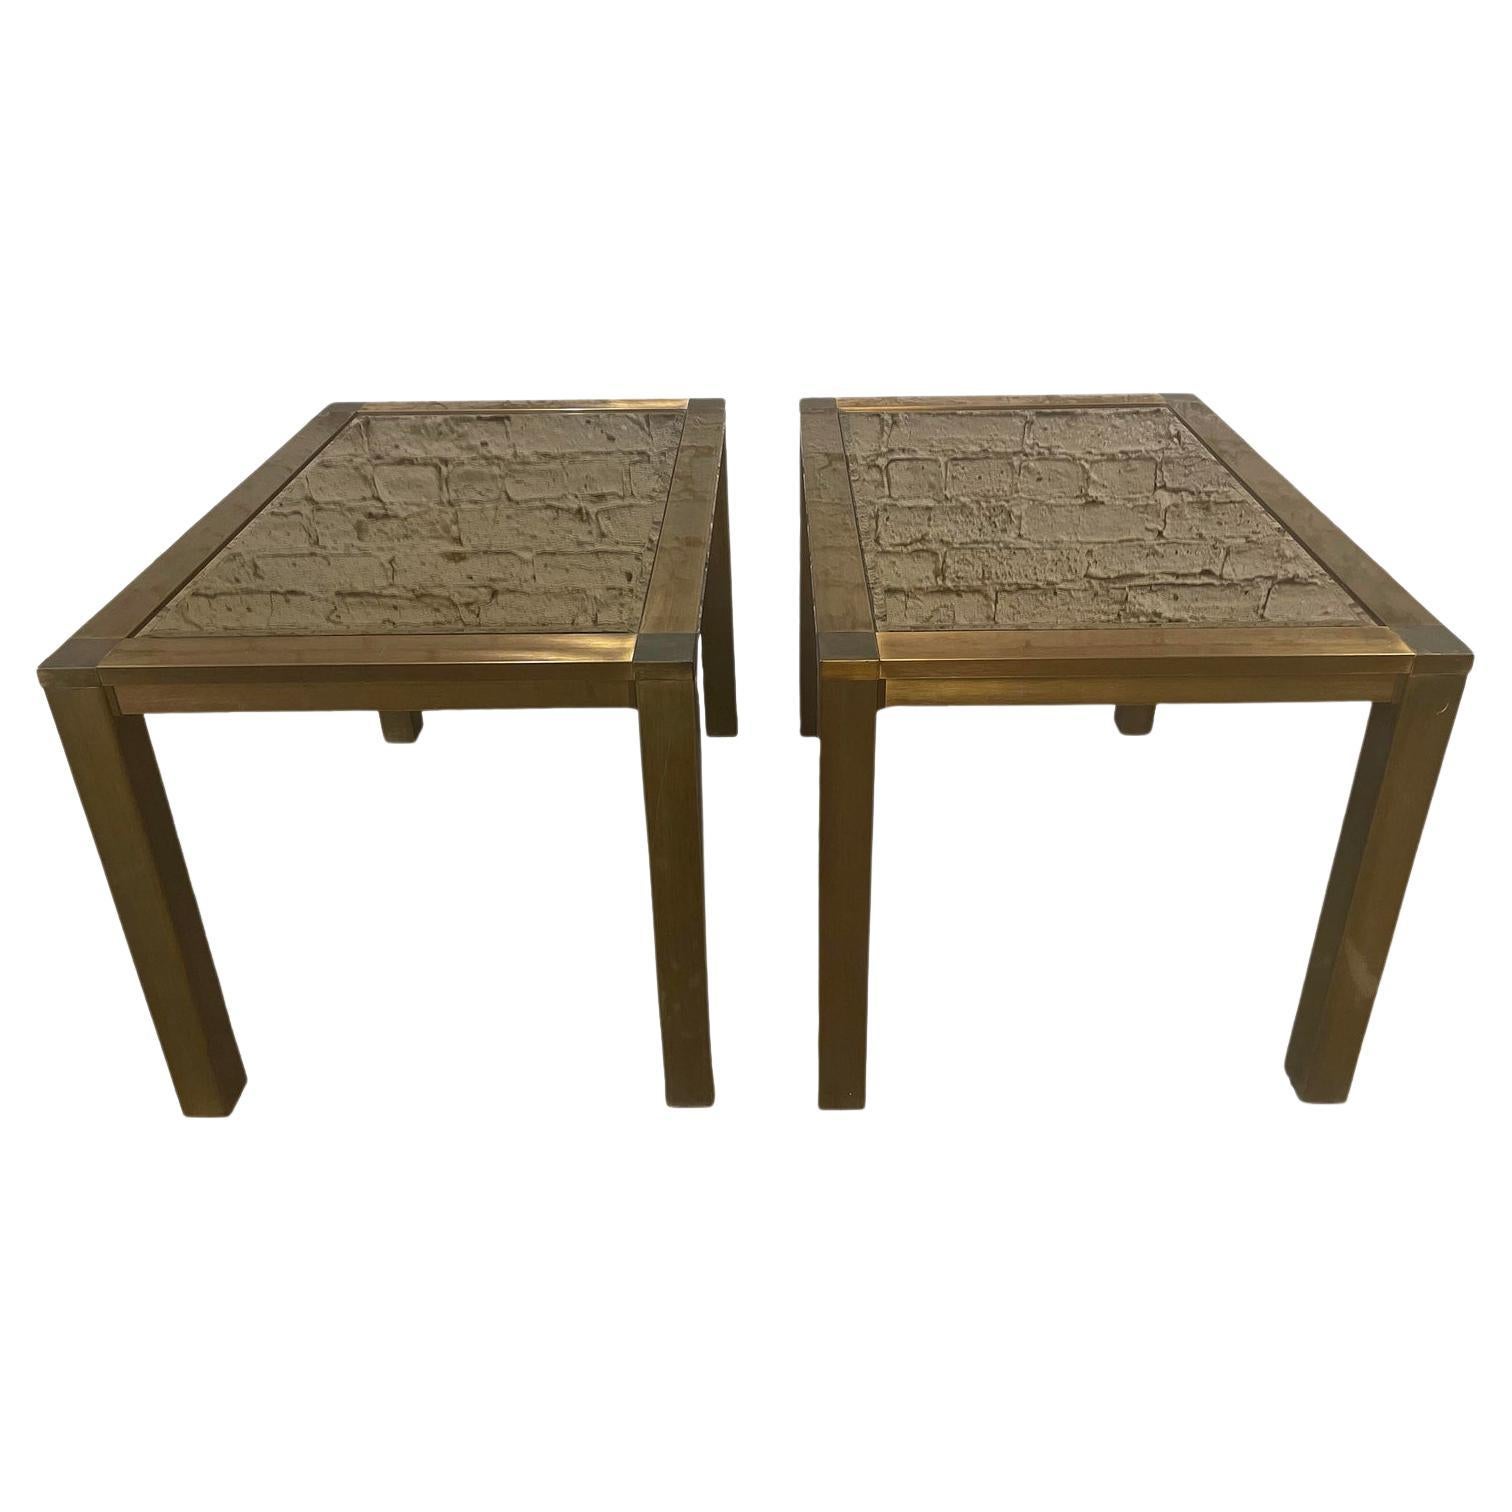 Vintage 1970s Brass Side Tables - a Pair For Sale